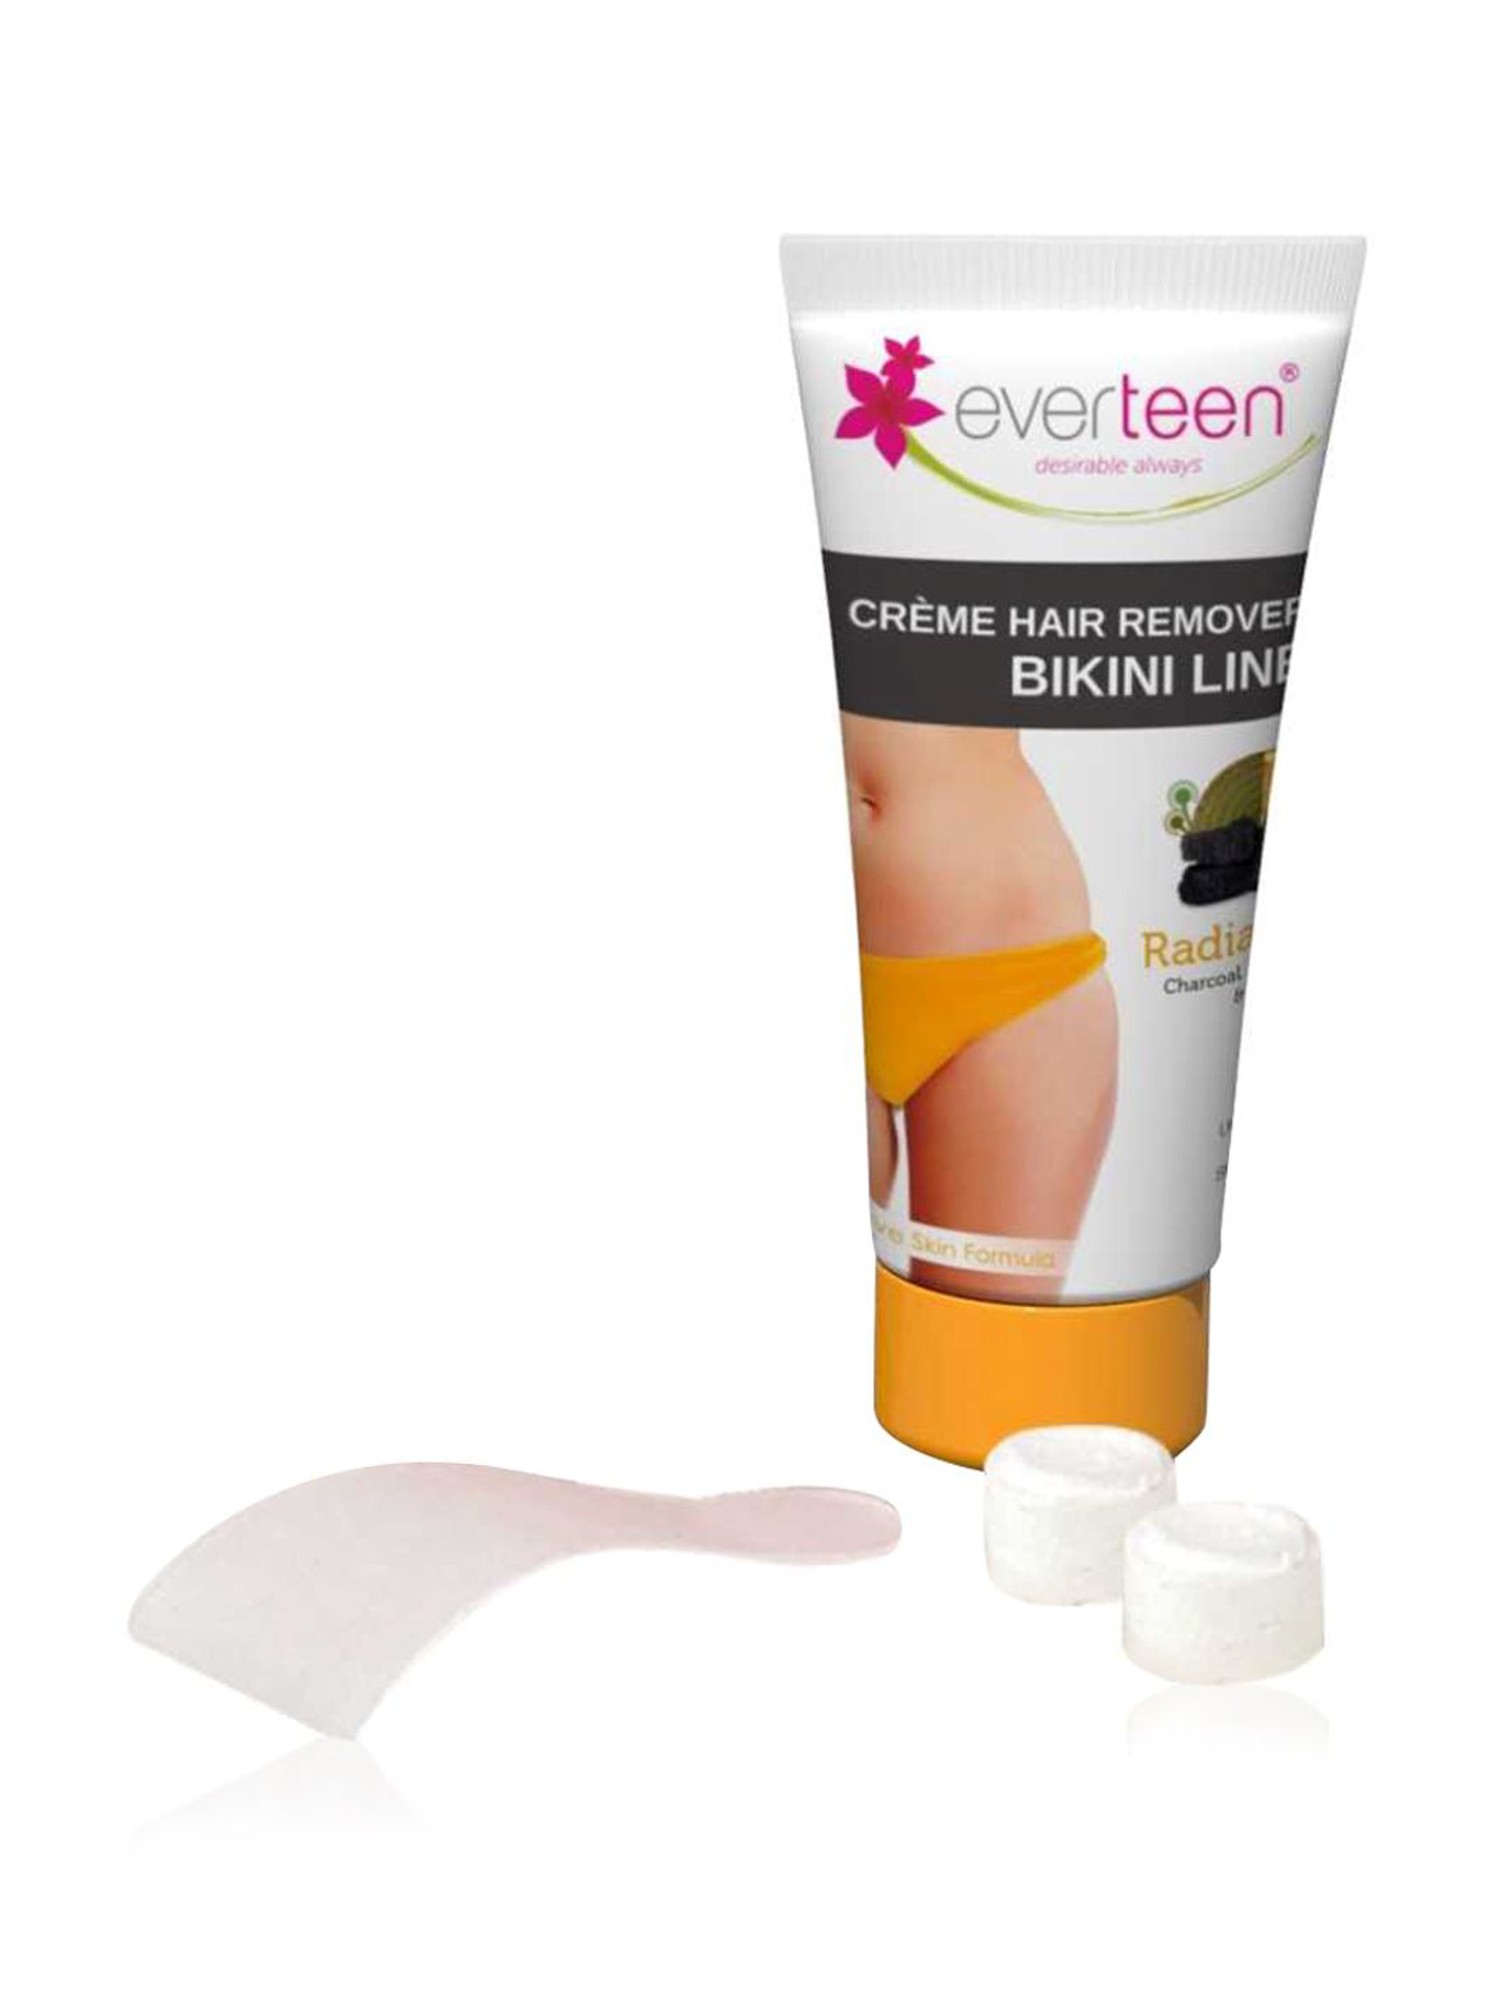 Everteen Bikini Line Hair Remover Cream Review and Experience